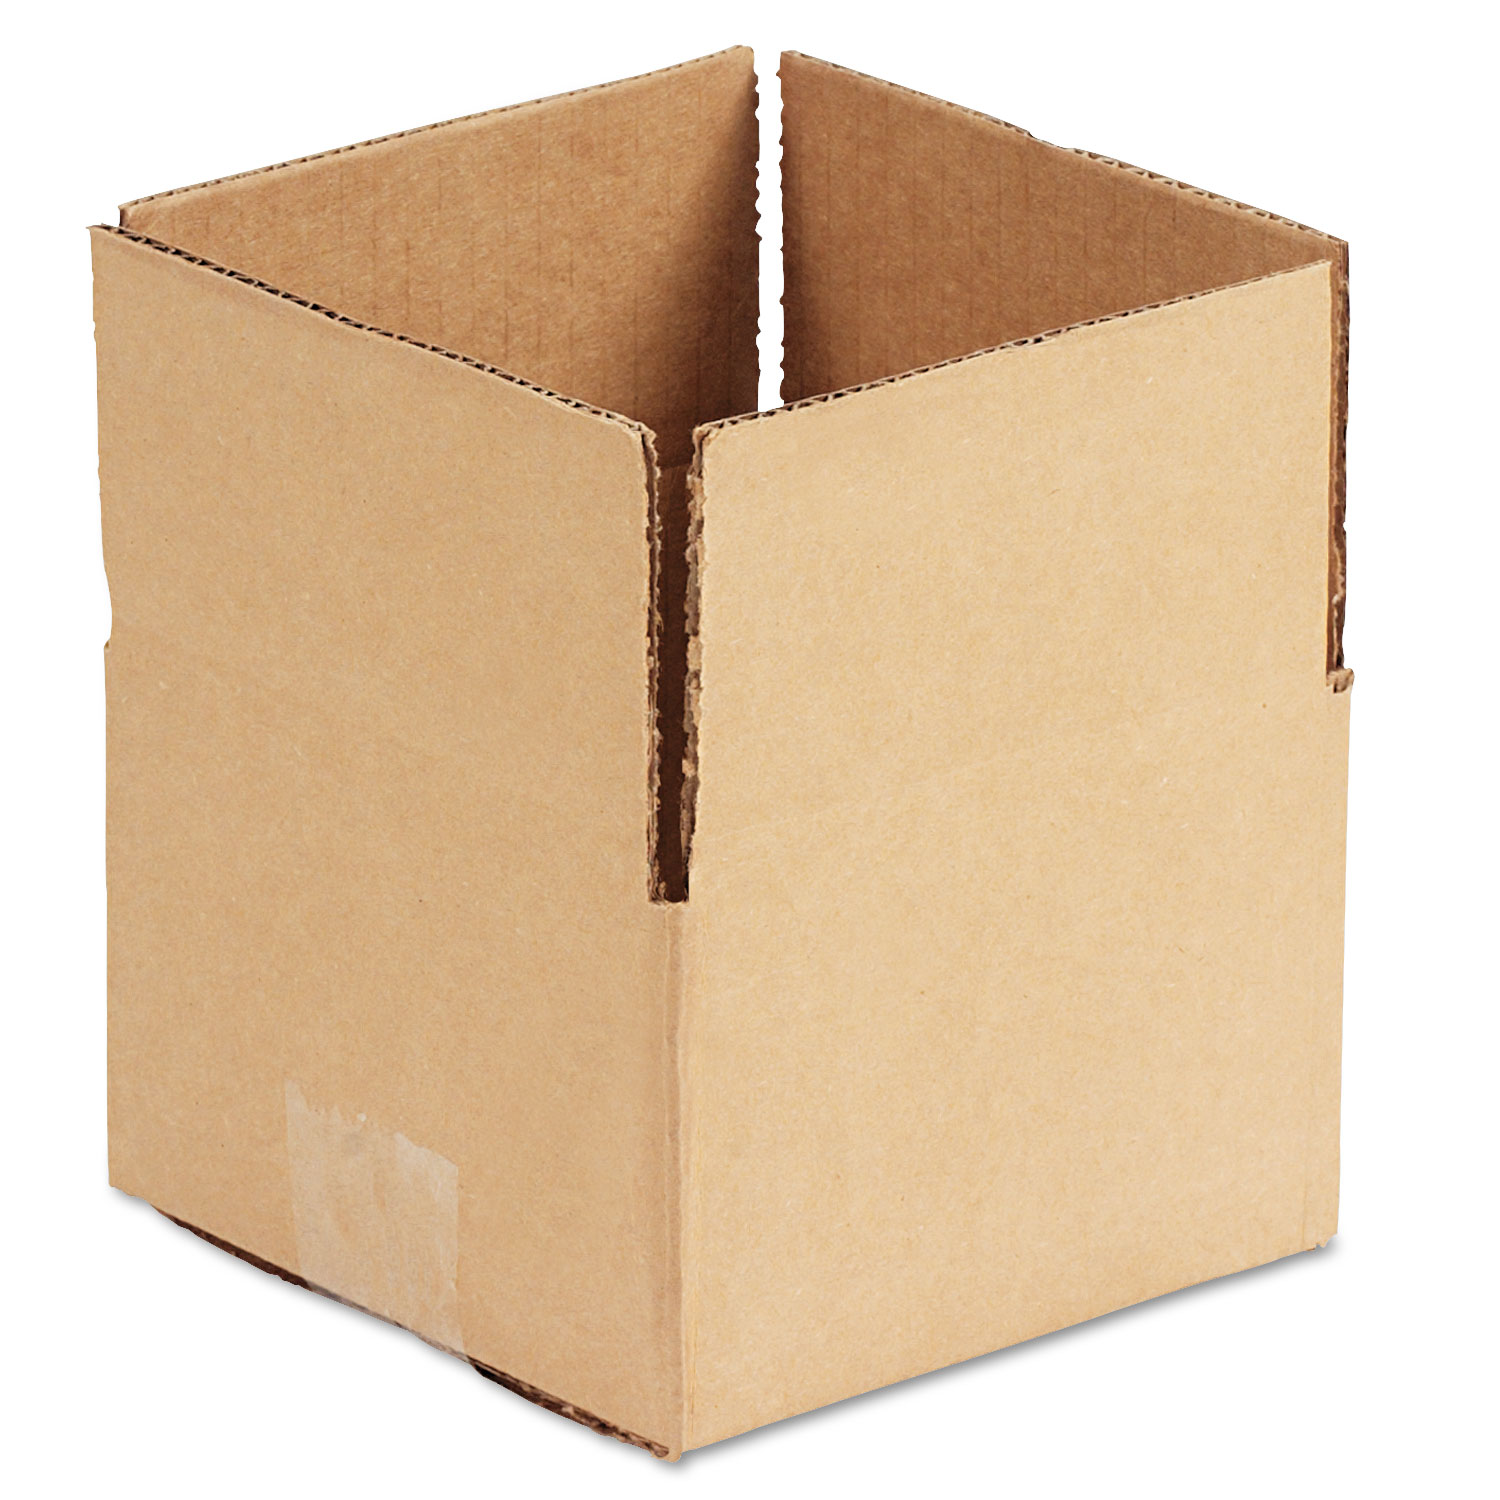 Fixed-Depth Corrugated Shipping Boxes, Regular Slotted Container (RSC ...